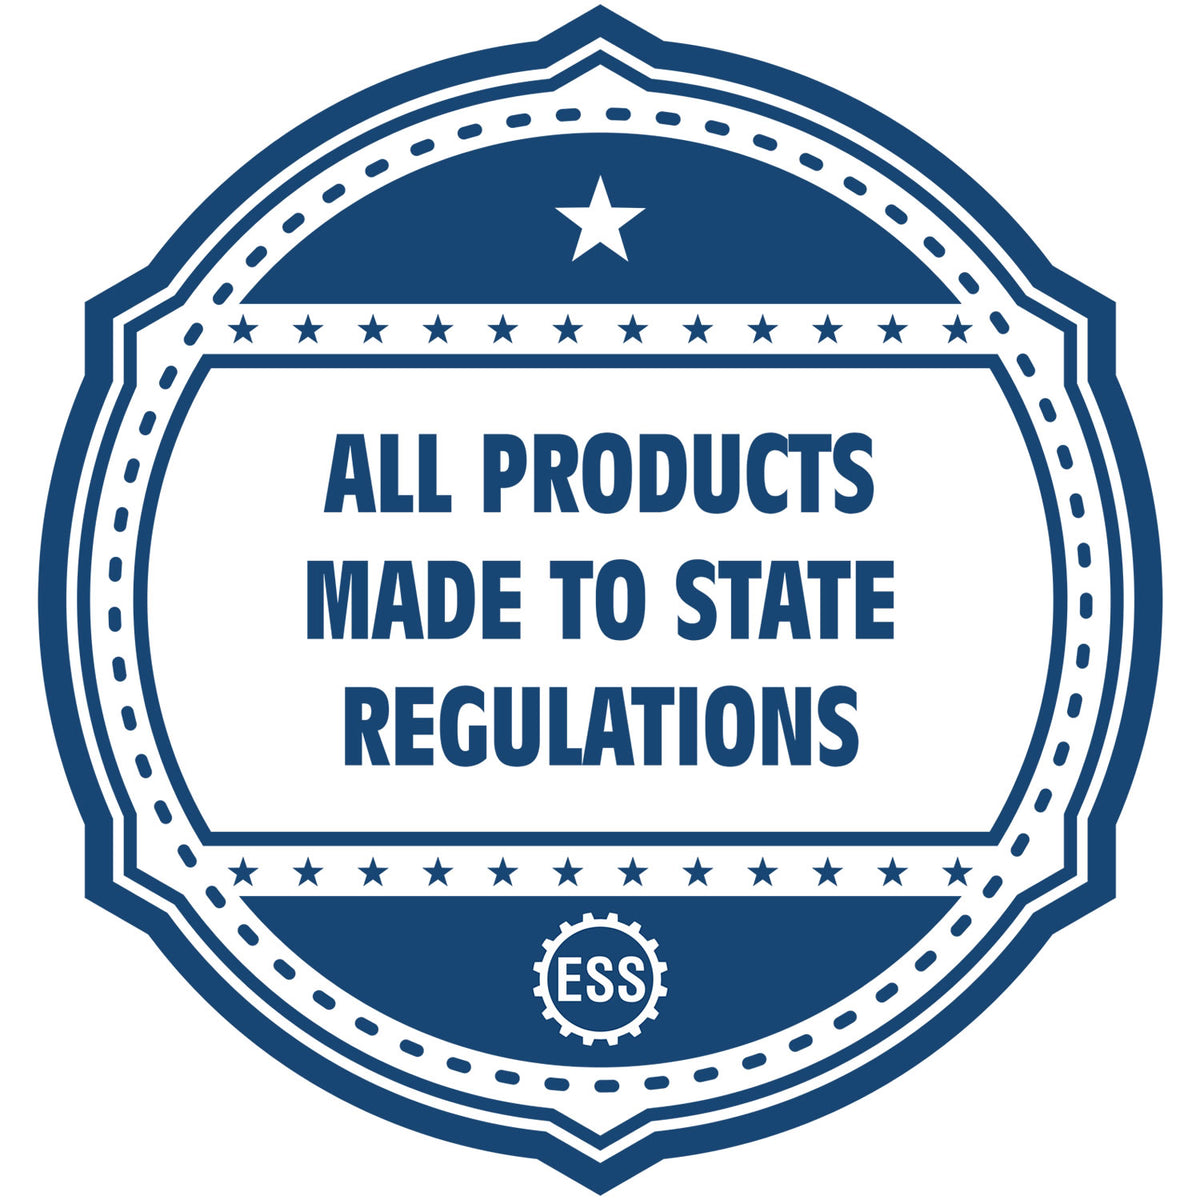 An icon or badge element for the Long Reach New Mexico PE Seal showing that this product is made in compliance with state regulations.